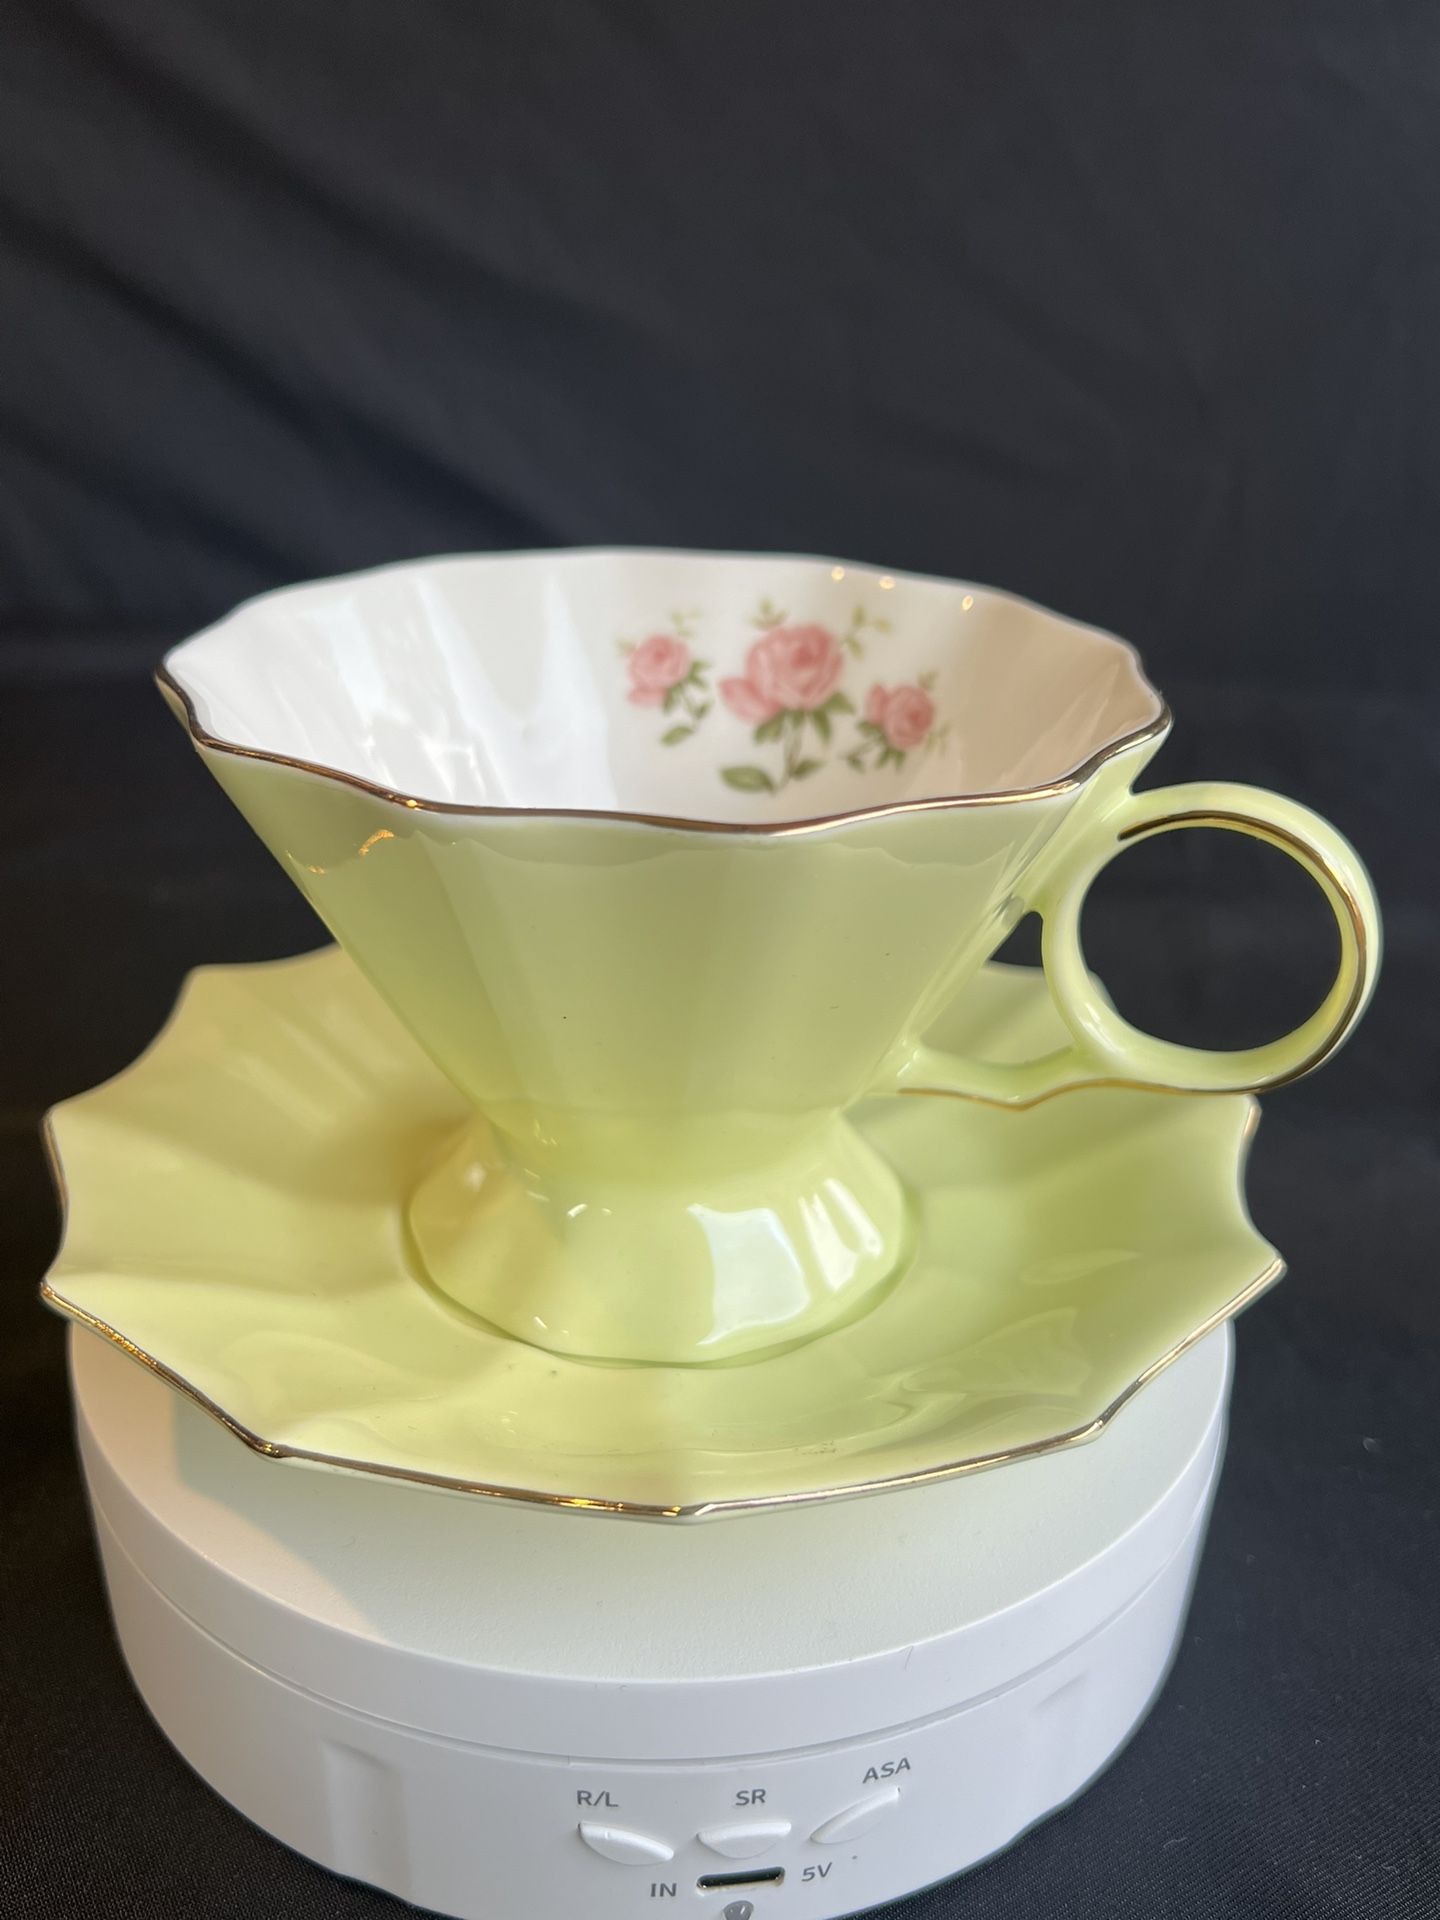 1 GORGEOUS MERITAGE YELLOW FLUTED TEA CUP & SAUCER WITH ROSE TRANSFER